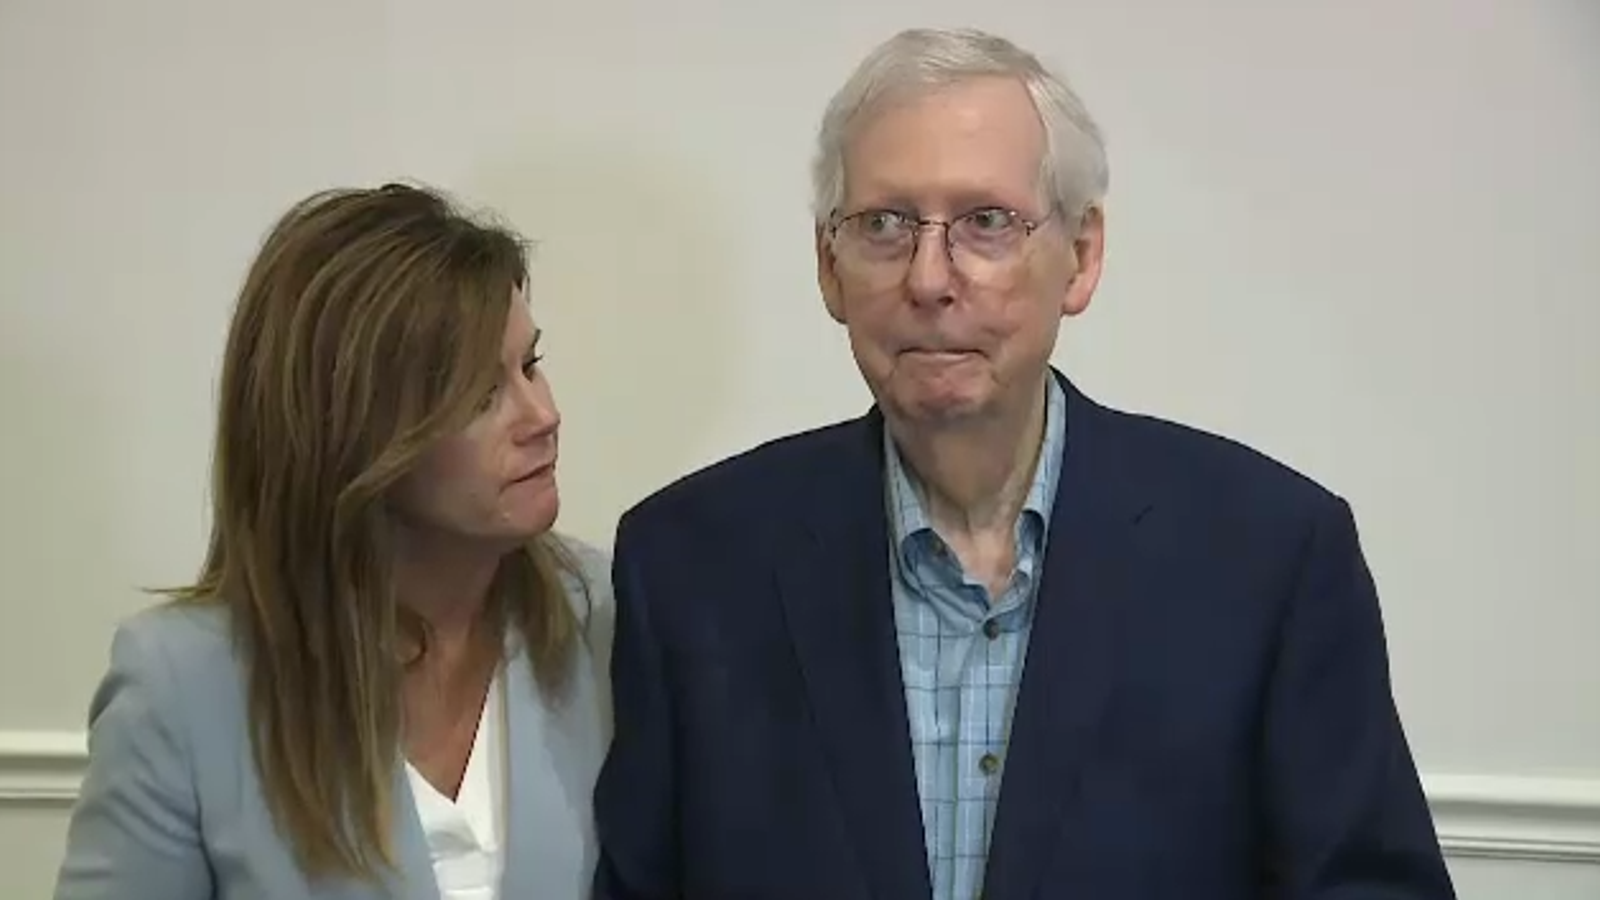 Senate Republican leader Mitch McConnell freezes during press conference for second time in weeks